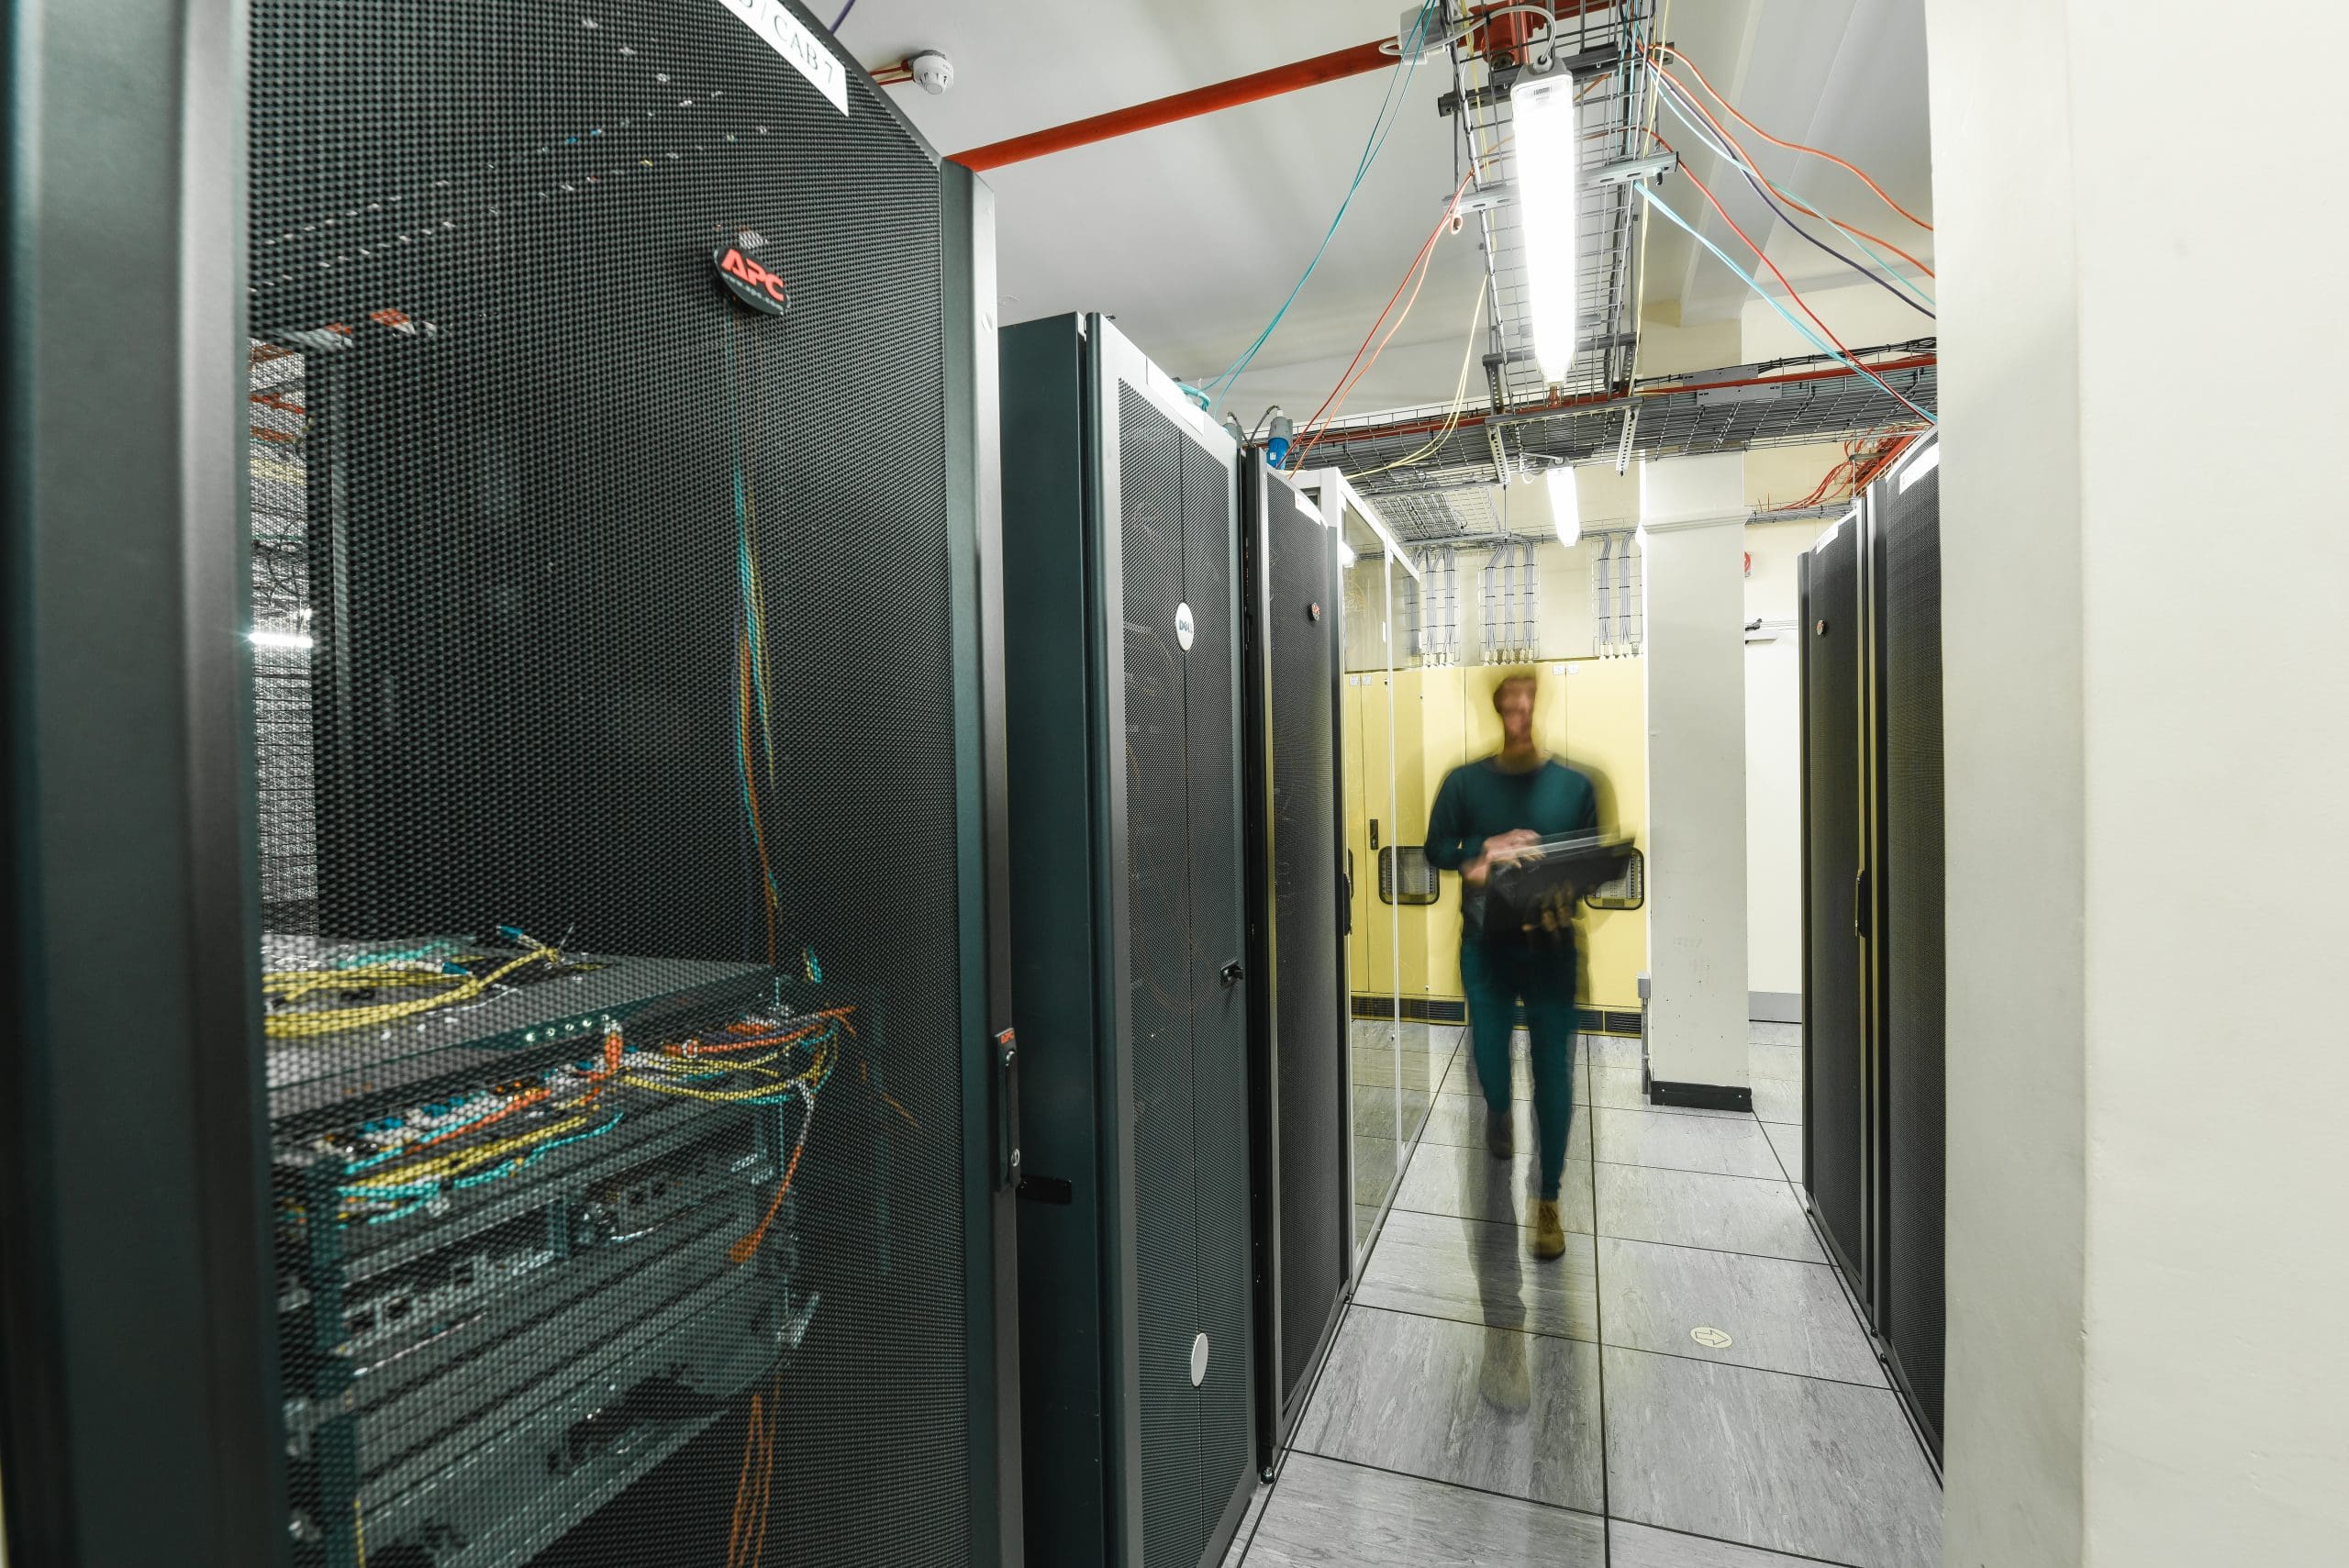 Photograph of a blurred person walking through a data centre.